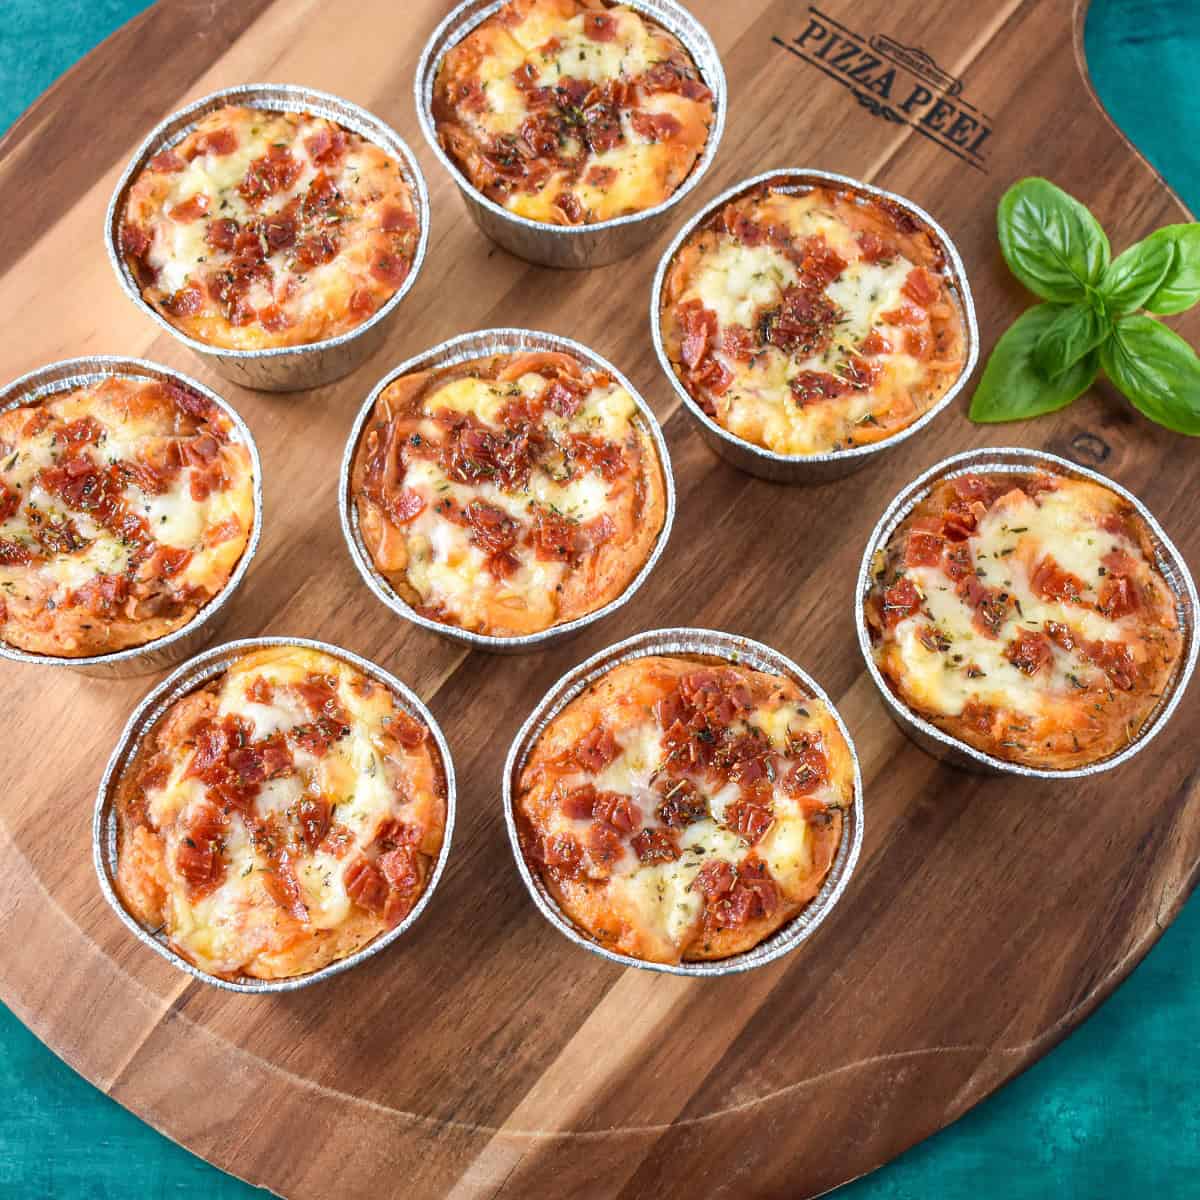 The individual pizza pot pies arranged on a wood board with a sprig of basil.